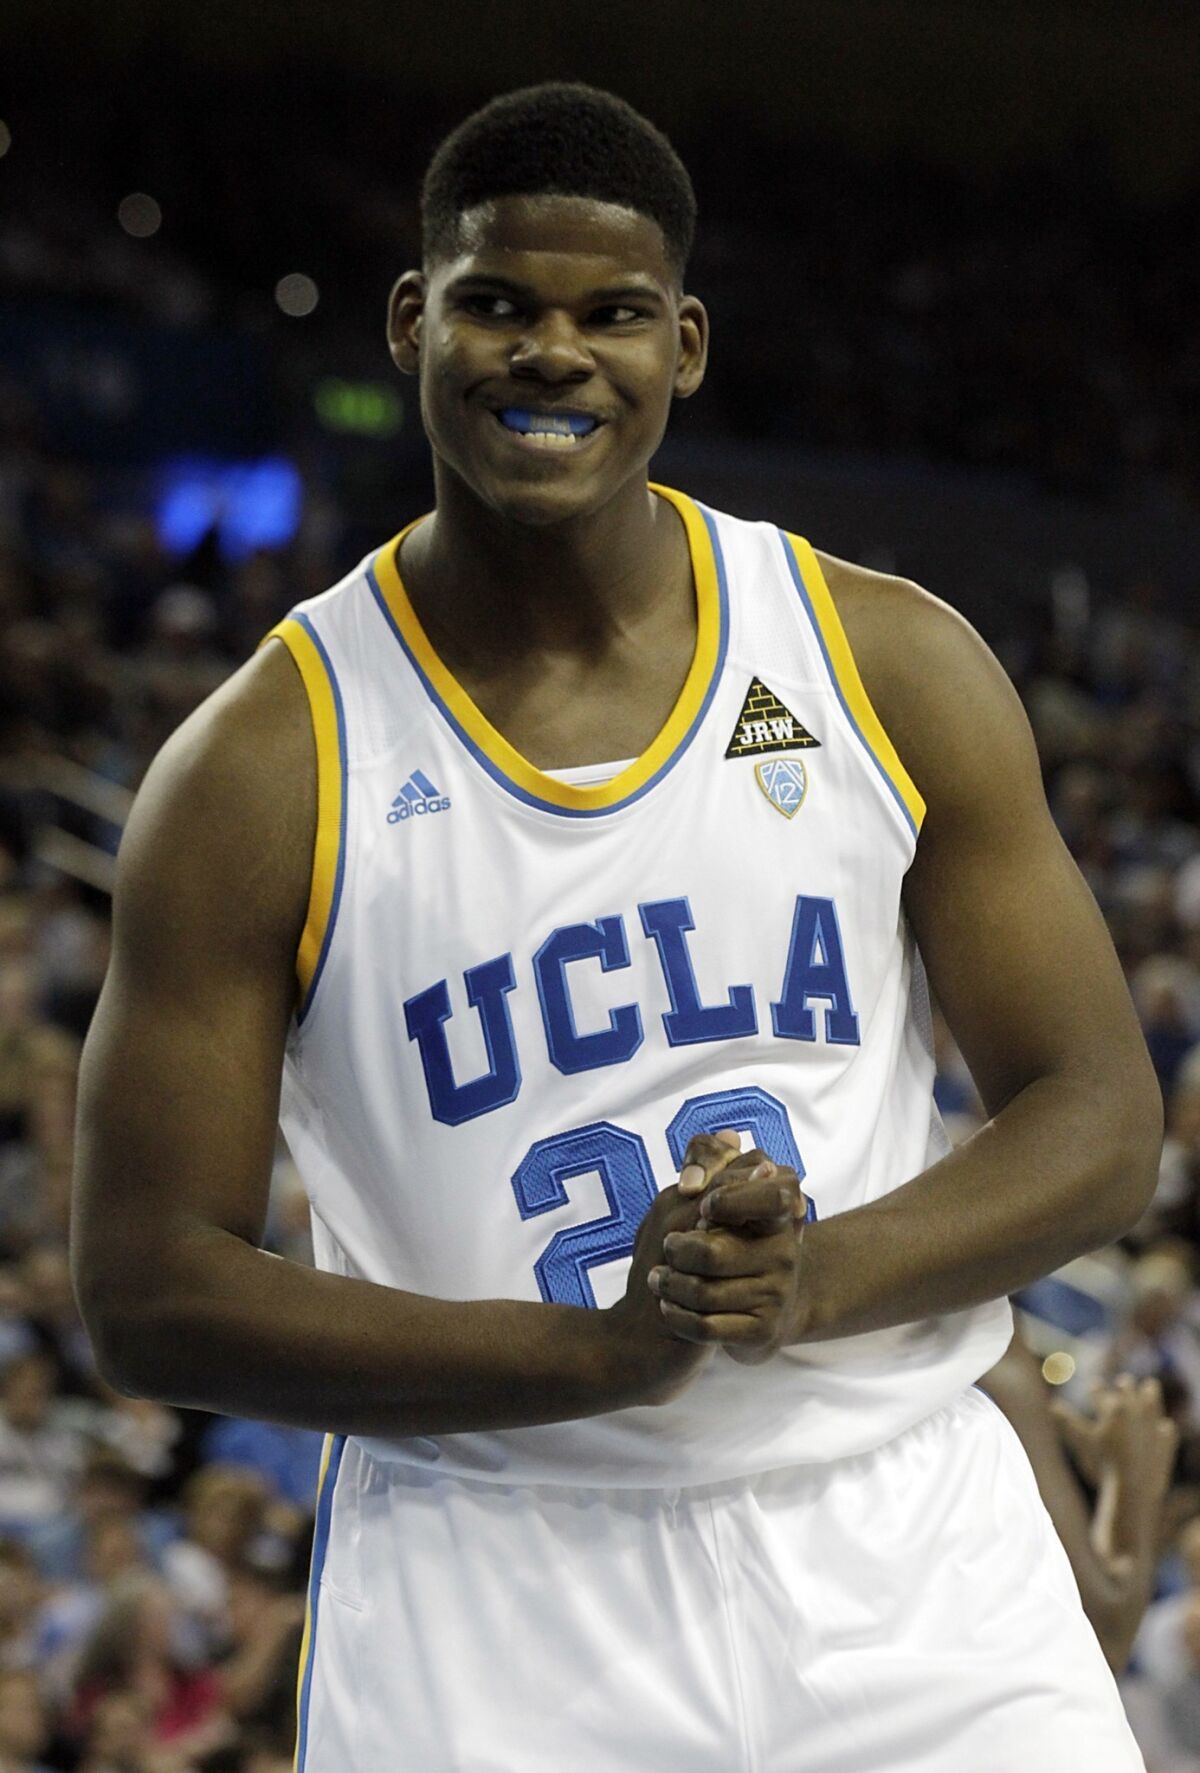 UCLA forward Tony Parker is hoping to have a more active role with the Bruins this season.